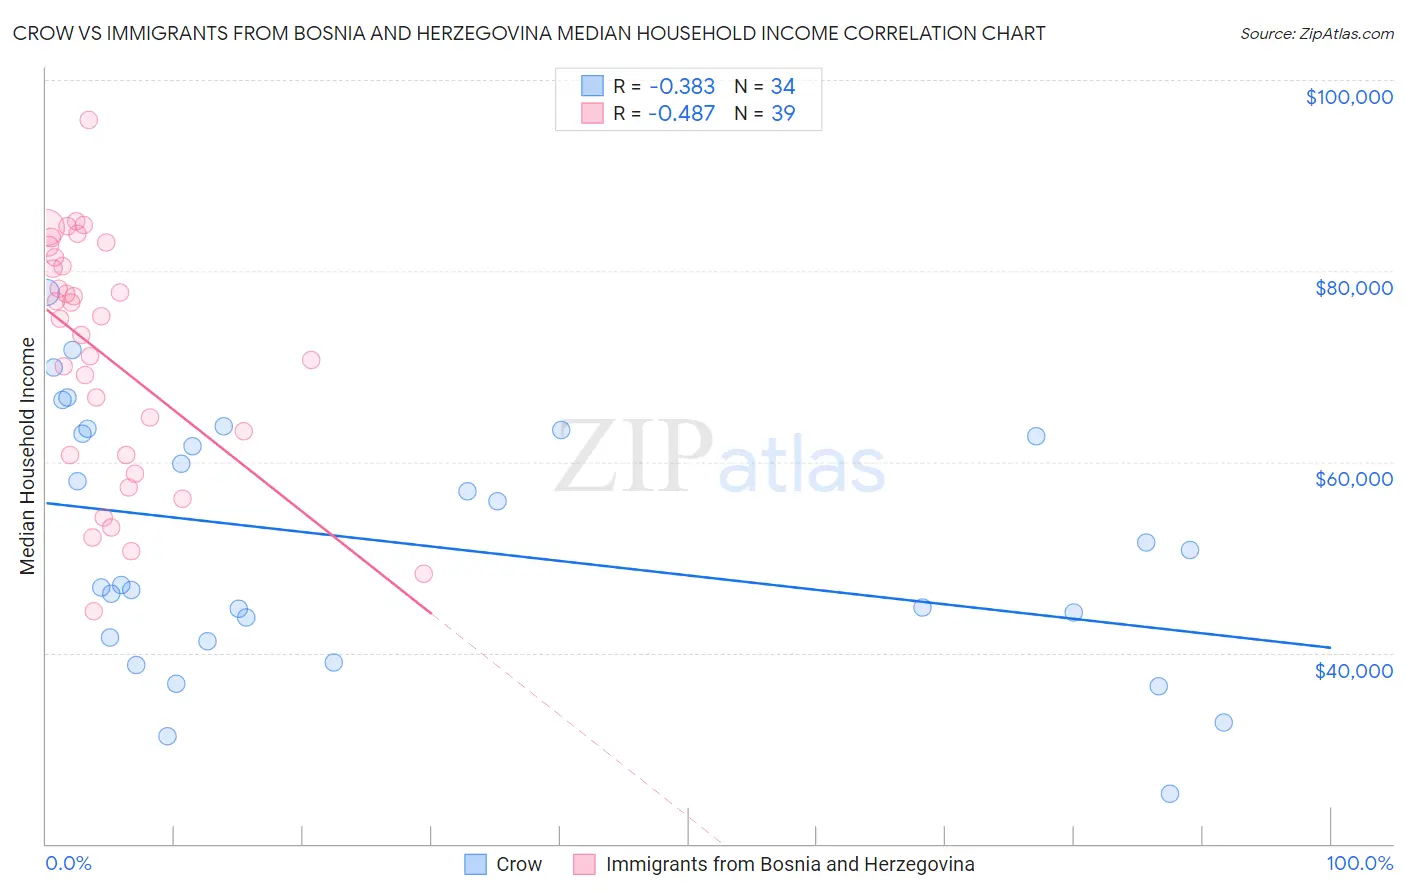 Crow vs Immigrants from Bosnia and Herzegovina Median Household Income